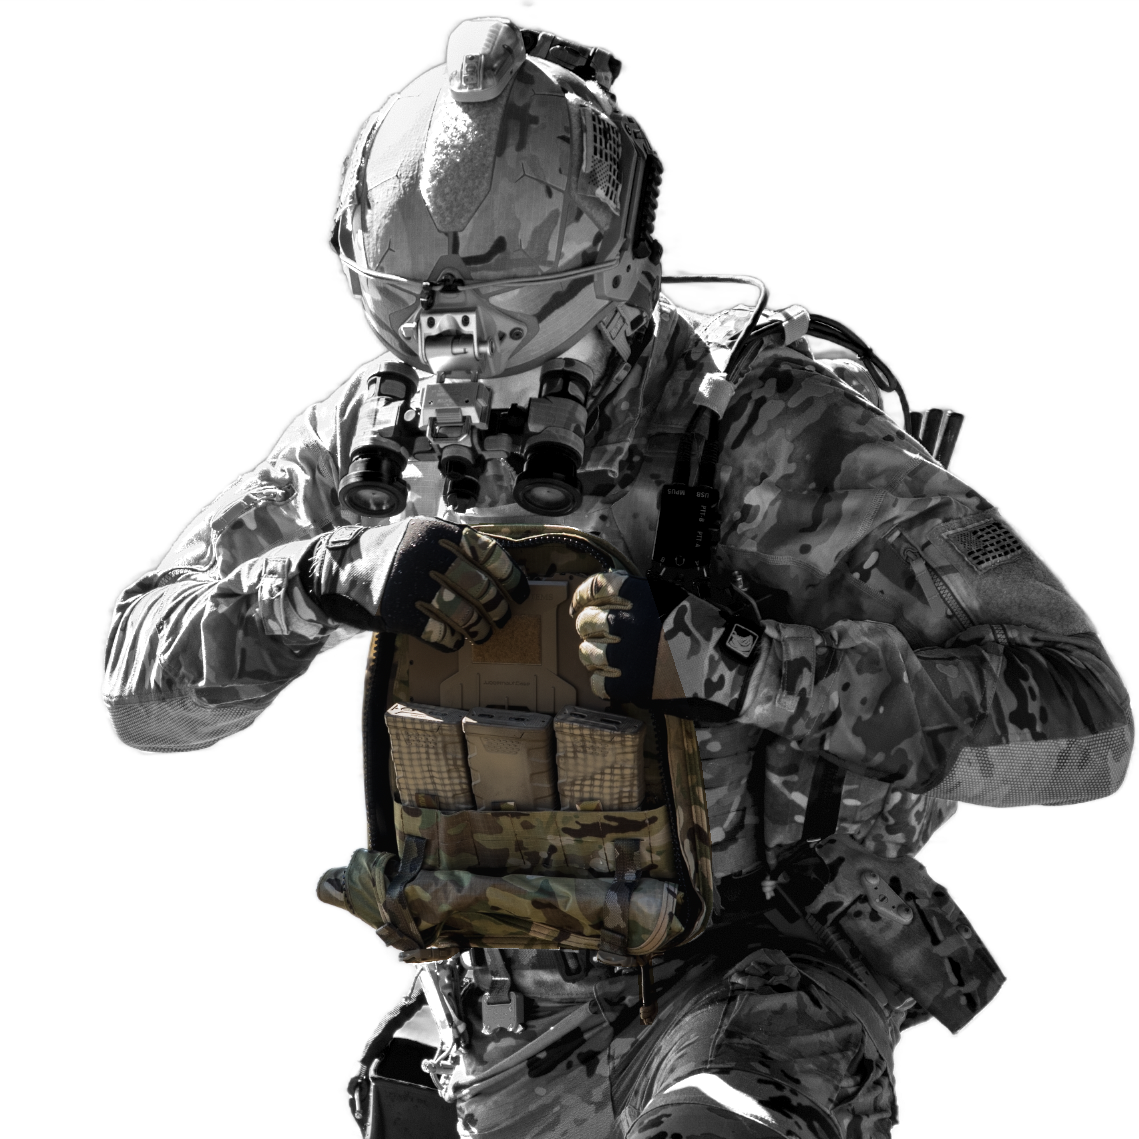 MATBOCK Raider Kit - Soldier Systems Daily